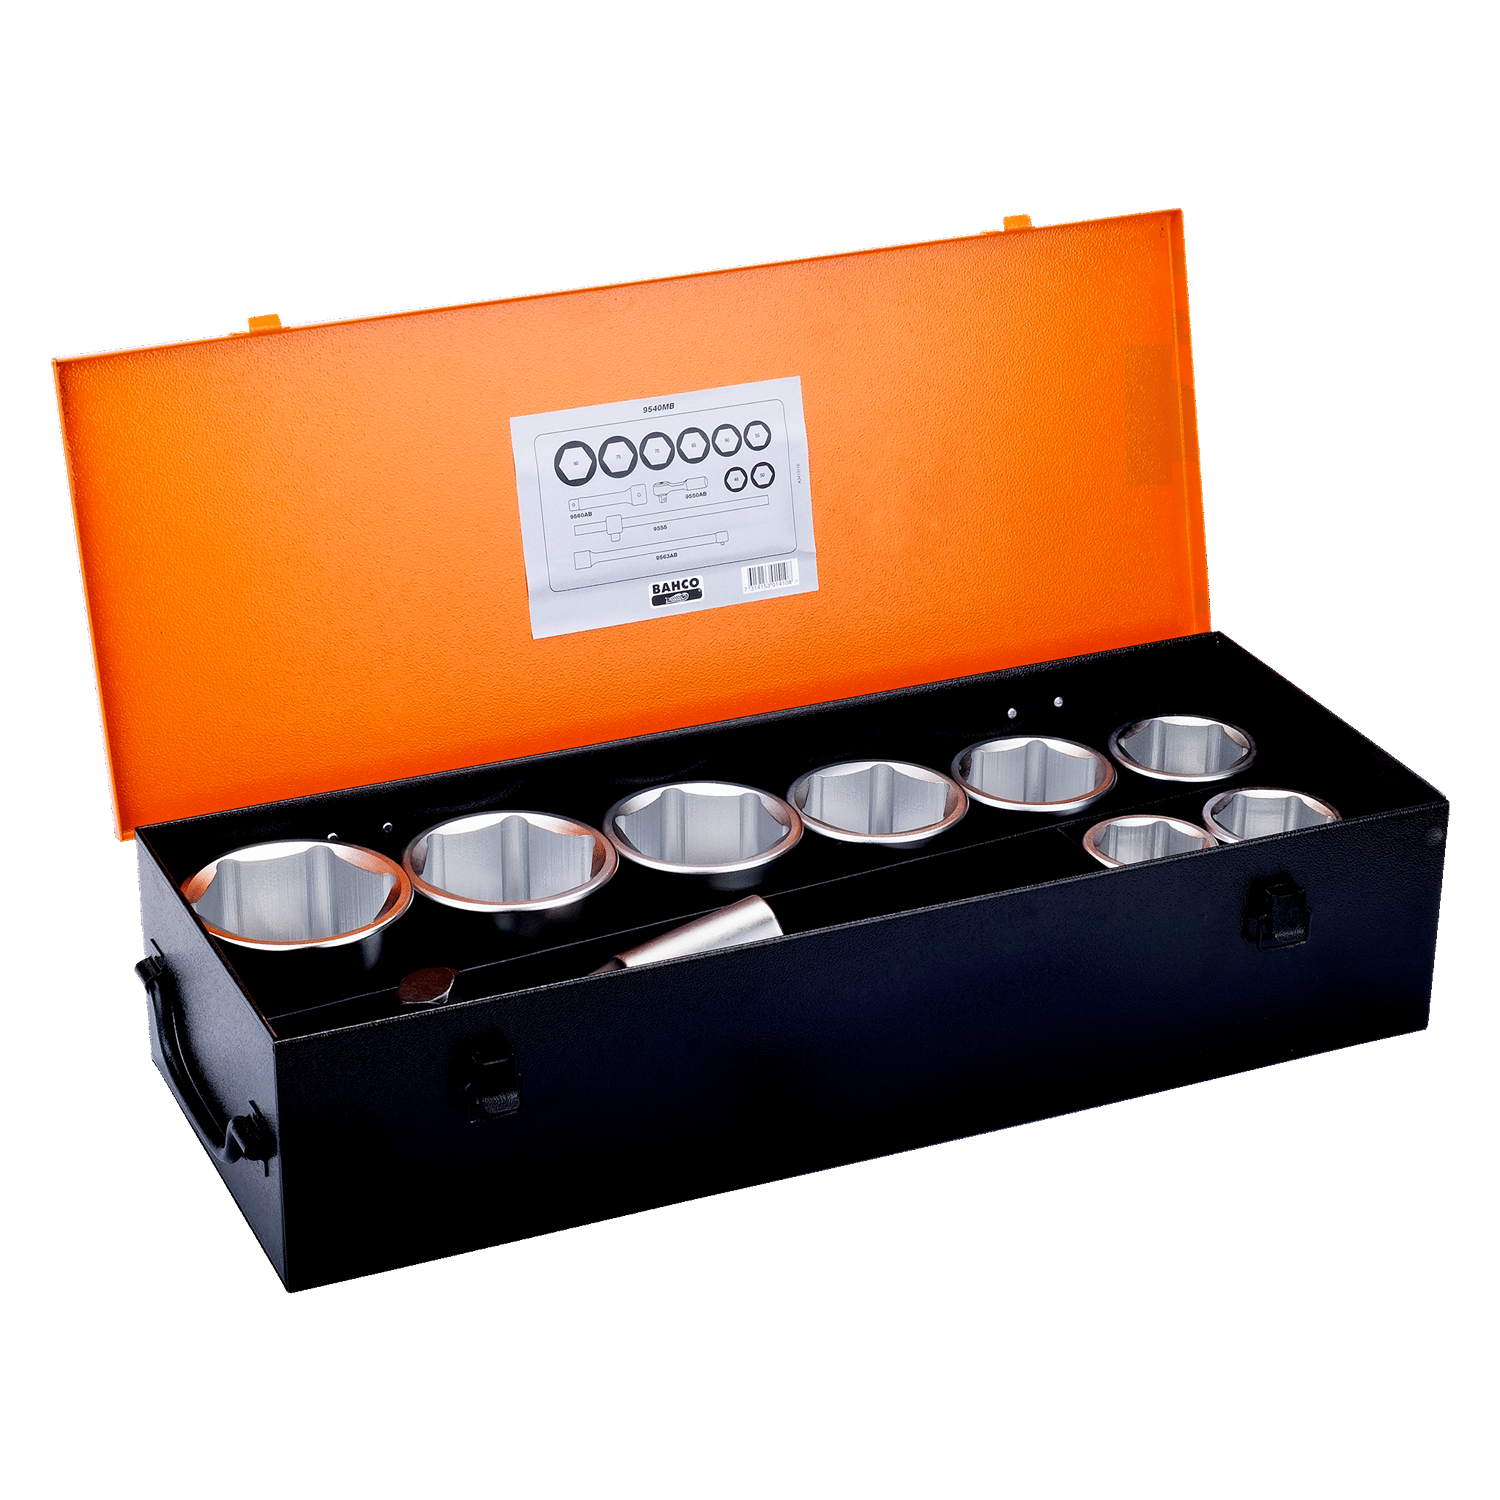 BAHCO 9540MB 1" Square Drive Socket Set With Metric Hex Profile - Premium Socket Set from BAHCO - Shop now at Yew Aik.